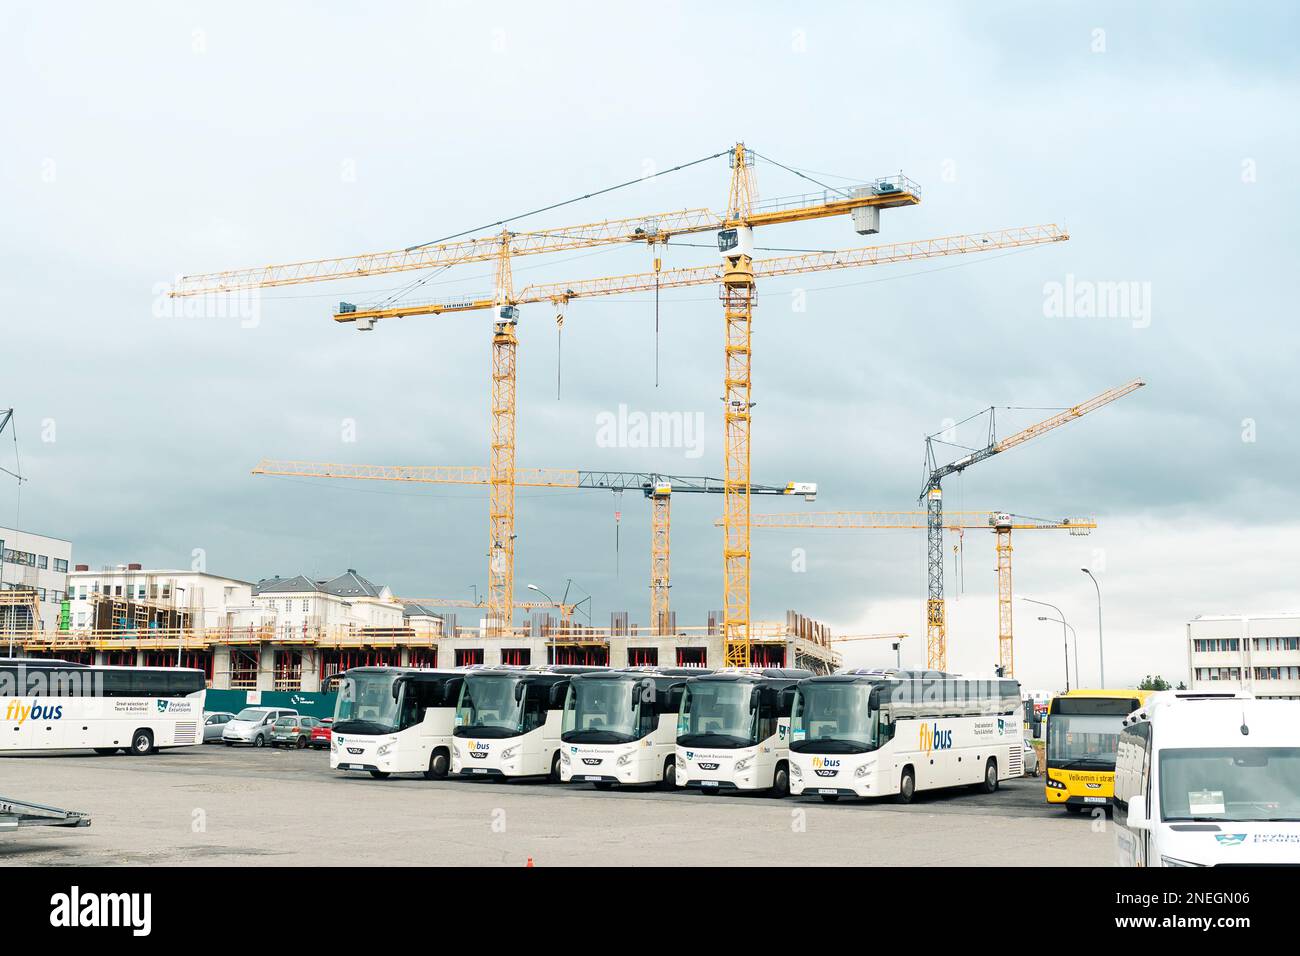 Reykjavik, Iceland - July 12 2022: Bus station in Reykjavik with construction site behind and many cranes Stock Photo